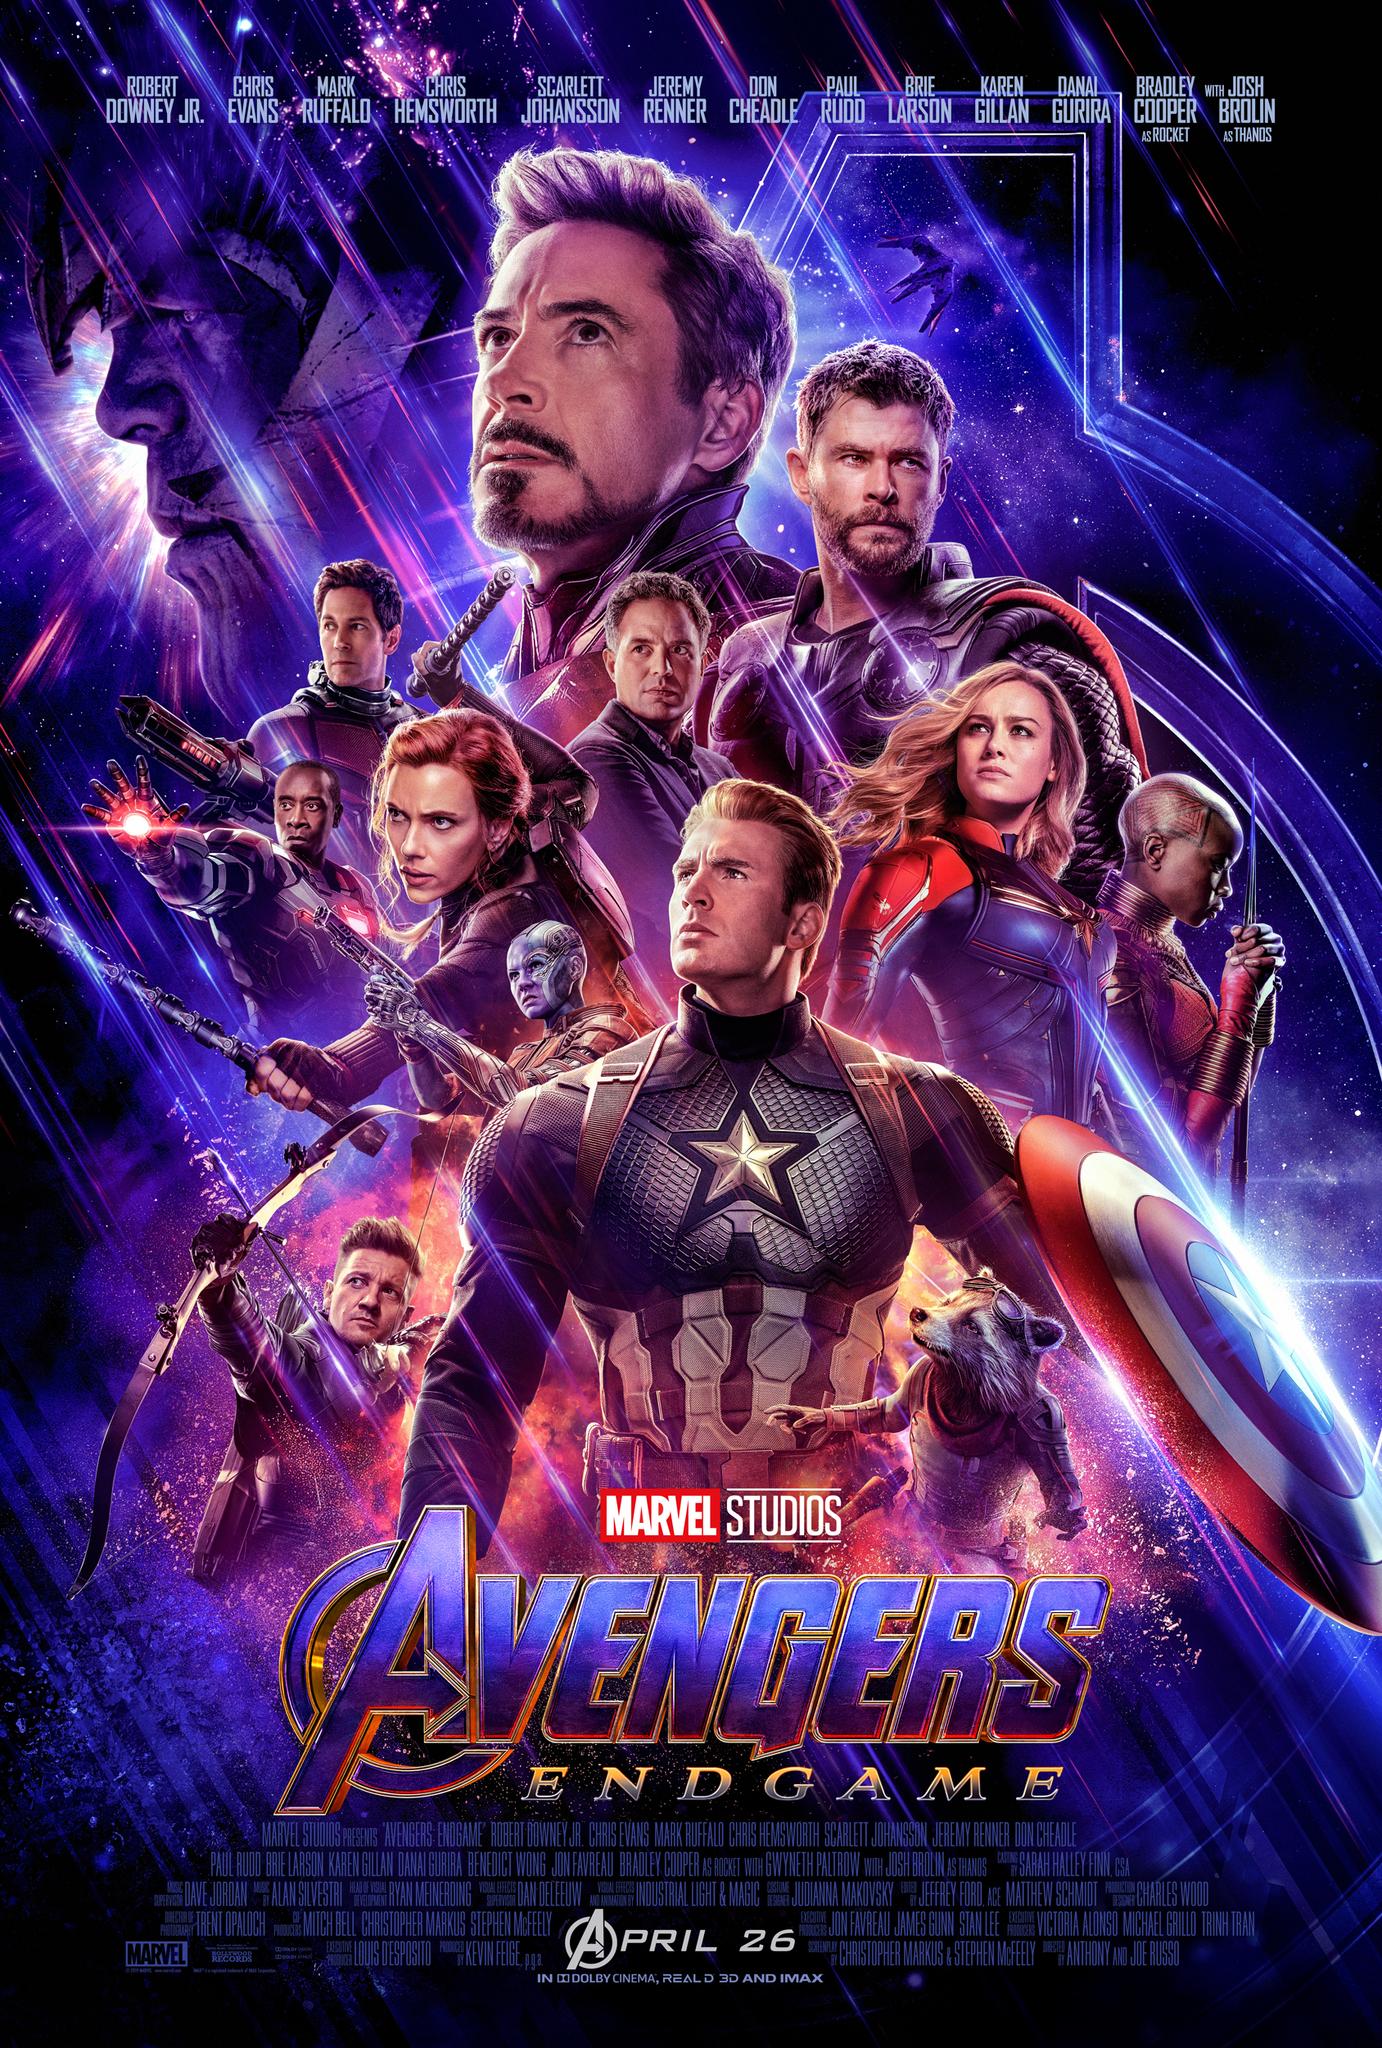 Avengers: Endgame (April 26, 2019) - Witness the breathtaking conclusion of the Infinity Saga as the surviving Avengers rally one last time to undo the devastating consequences of Thanos' snap.